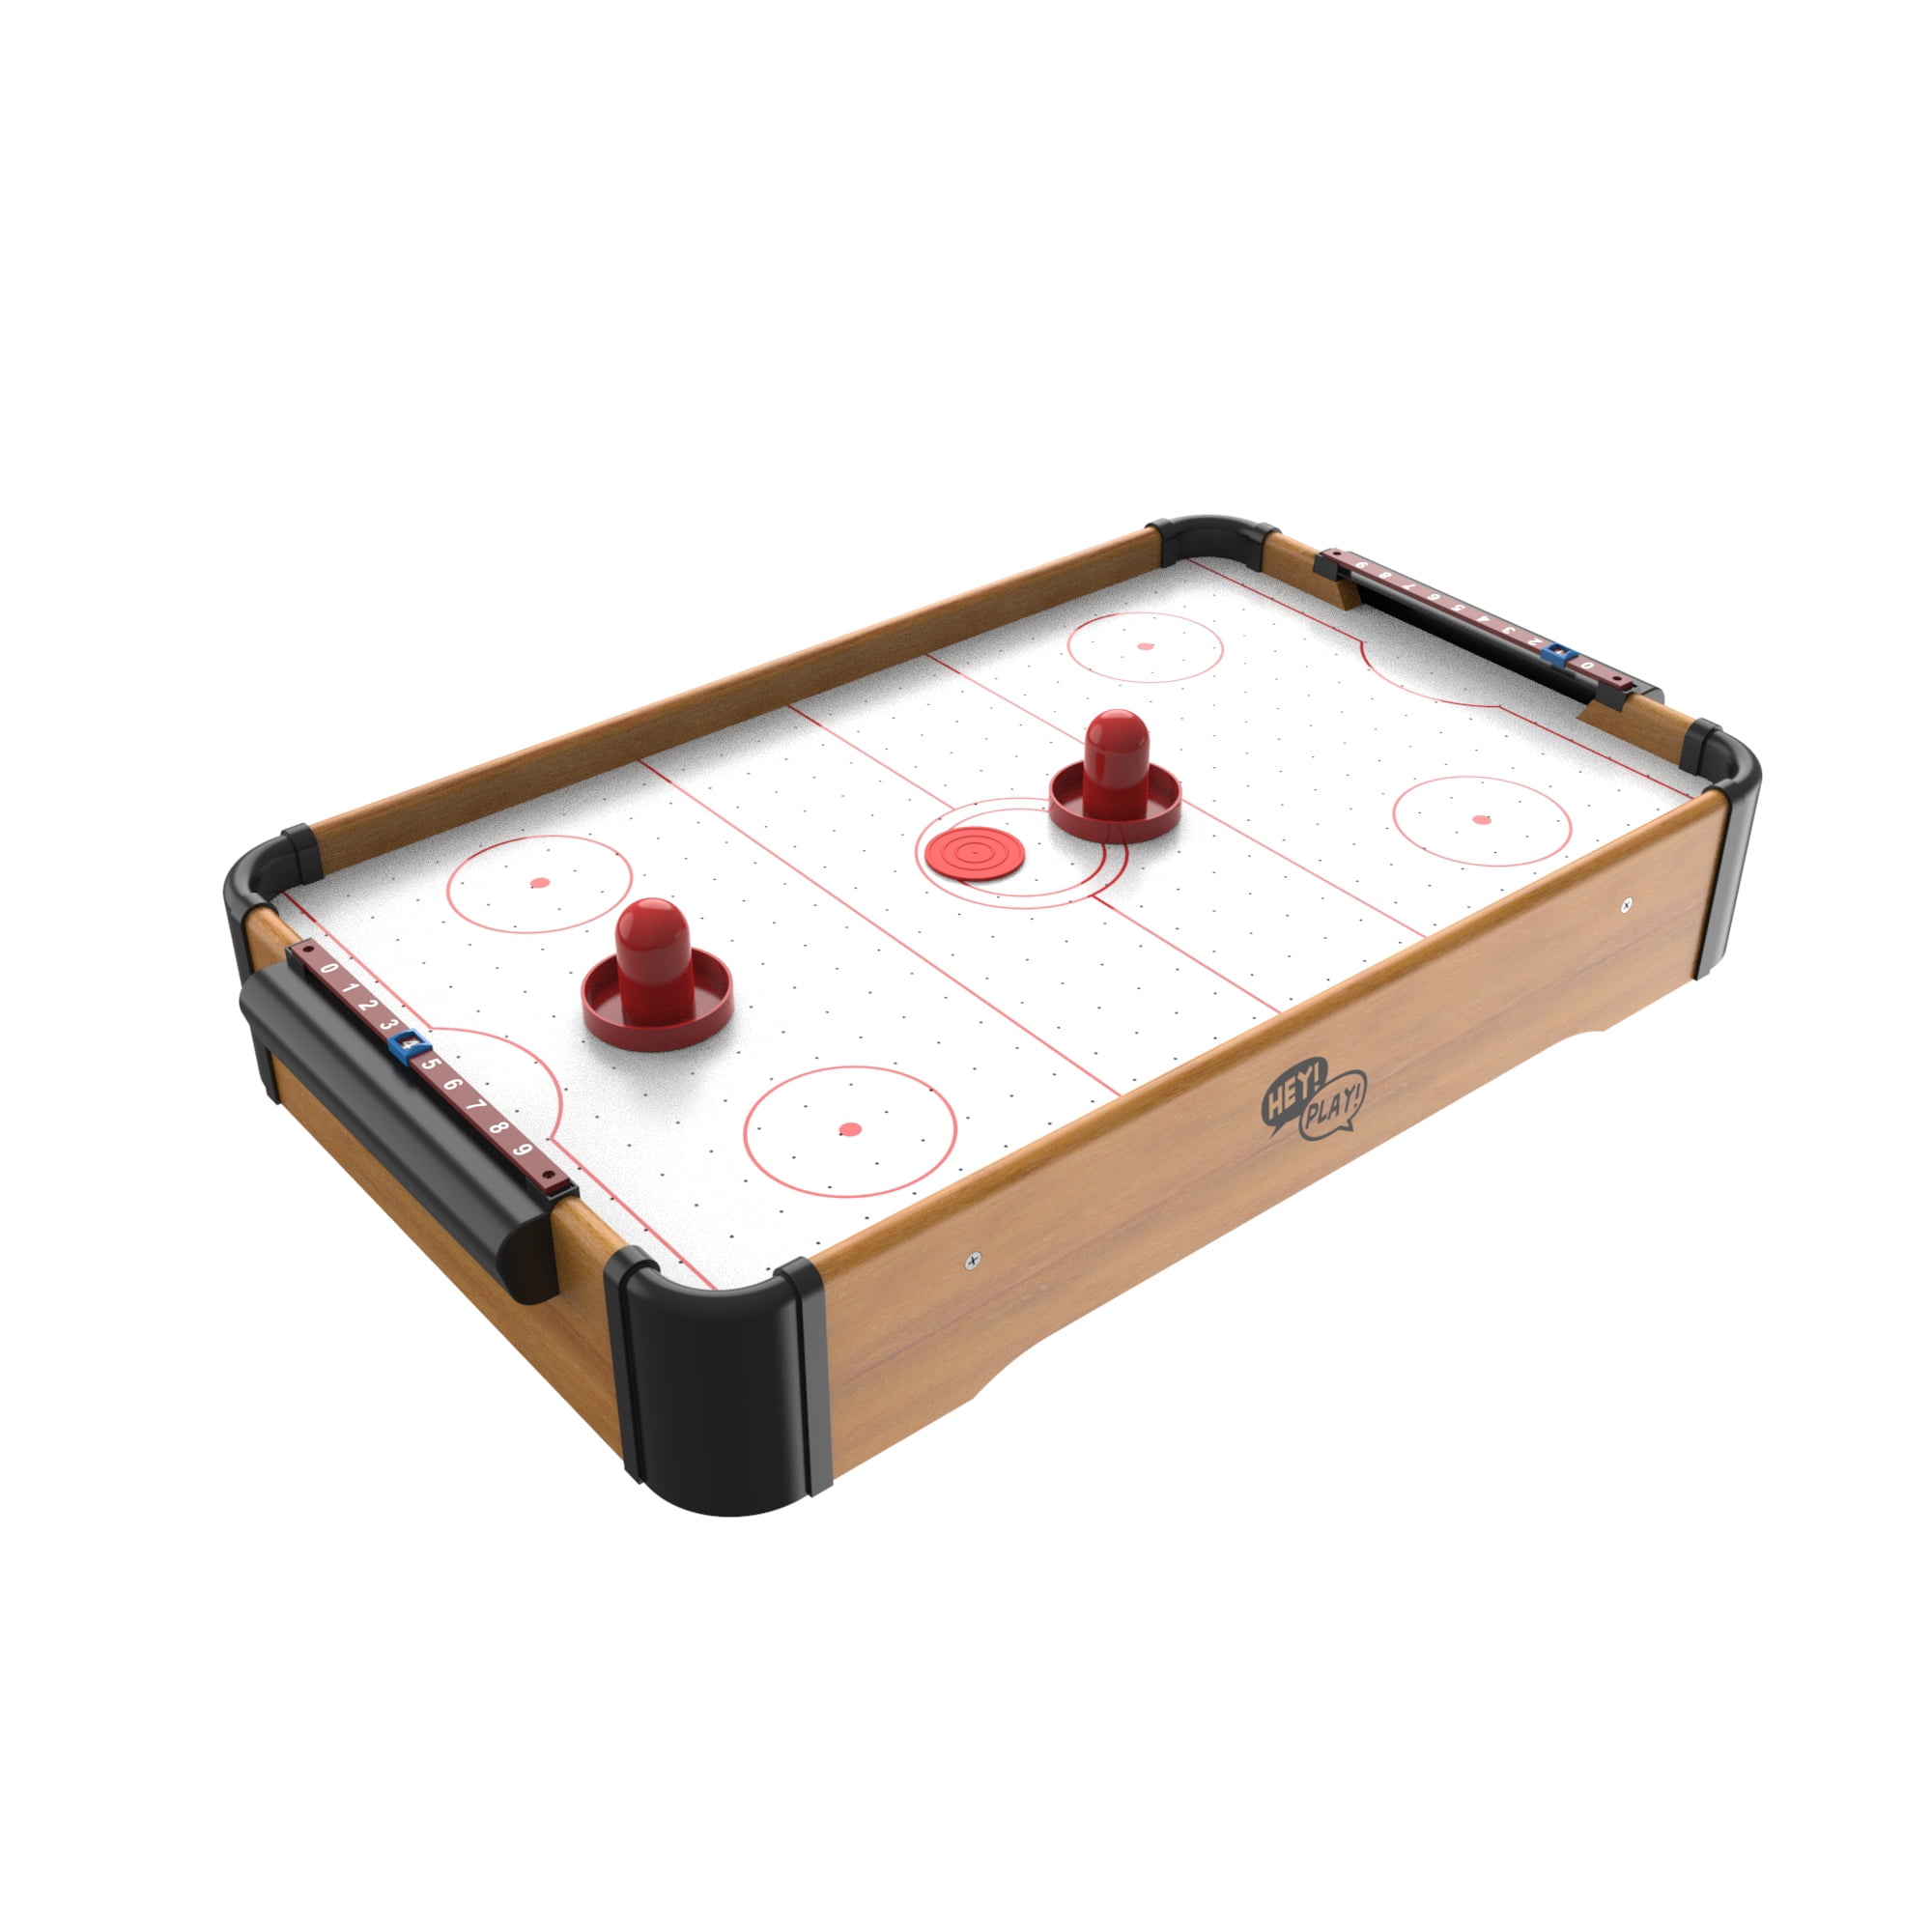 NEW WNB 20" TABLE TOP AIR HOCKEY ELECTRONIC GAME Family toys and games 50cm 